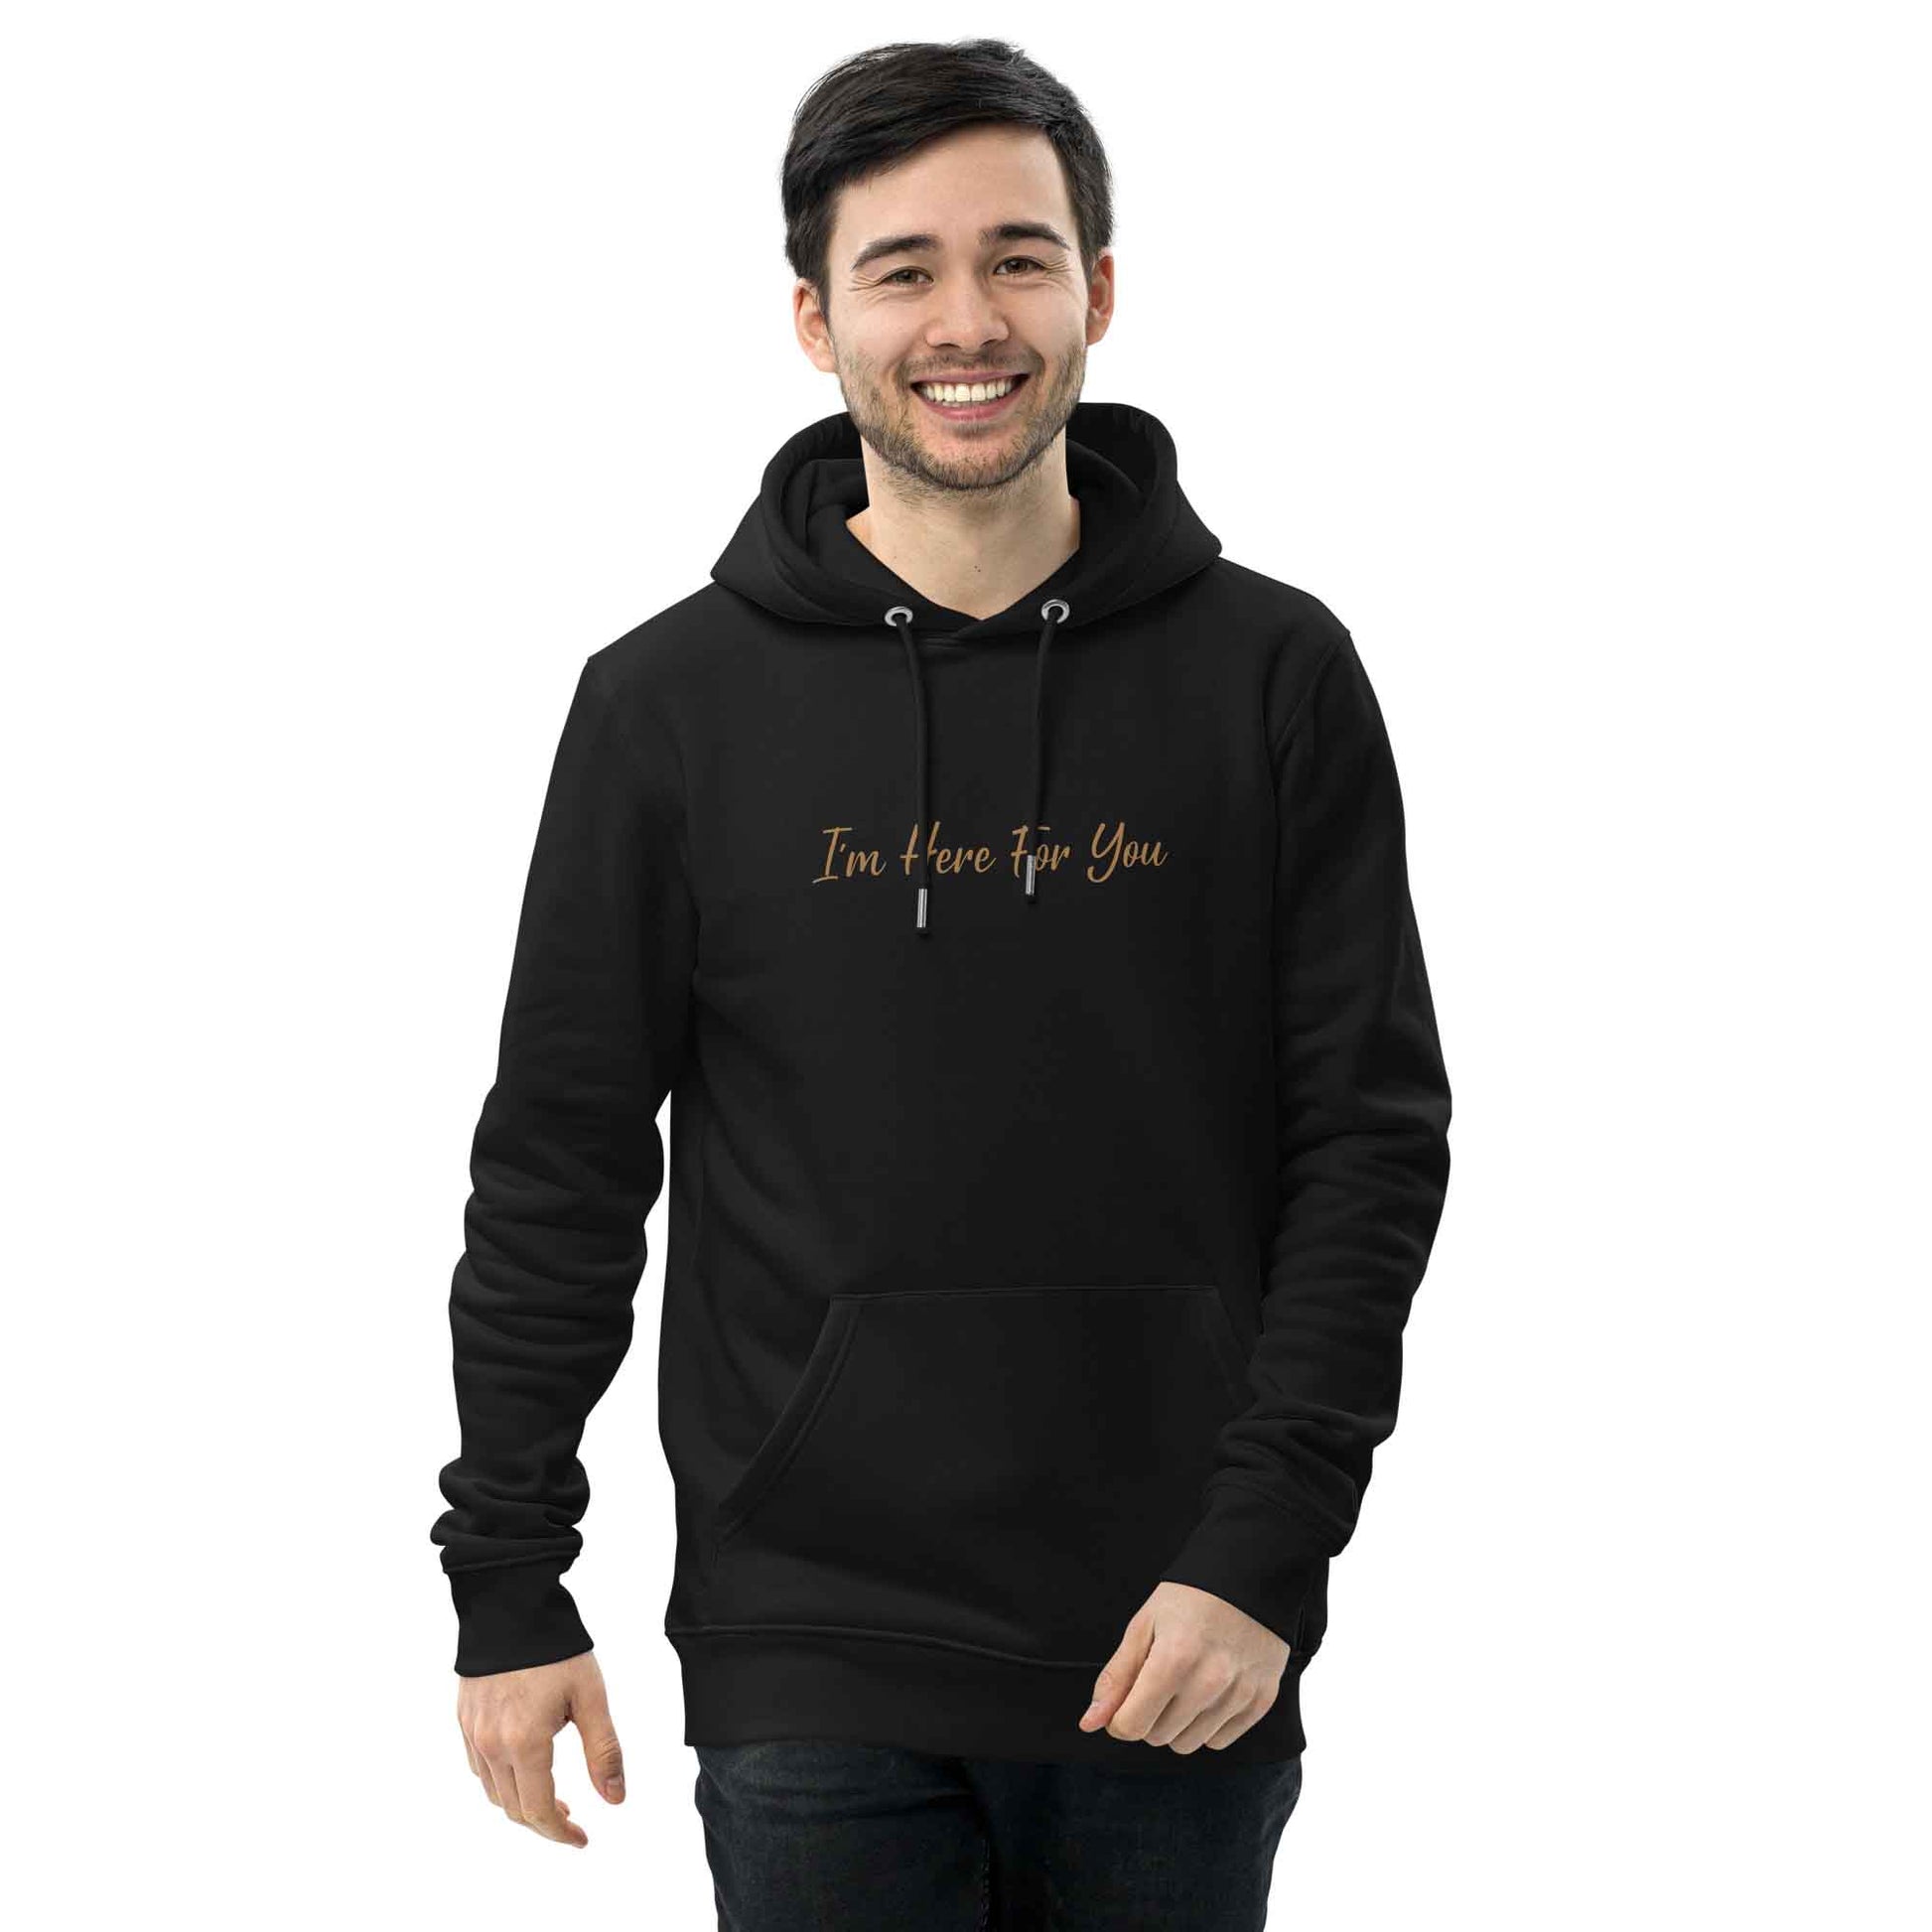 Men black organic cotton hoodie with inspirational quote, "I'm Here For You."